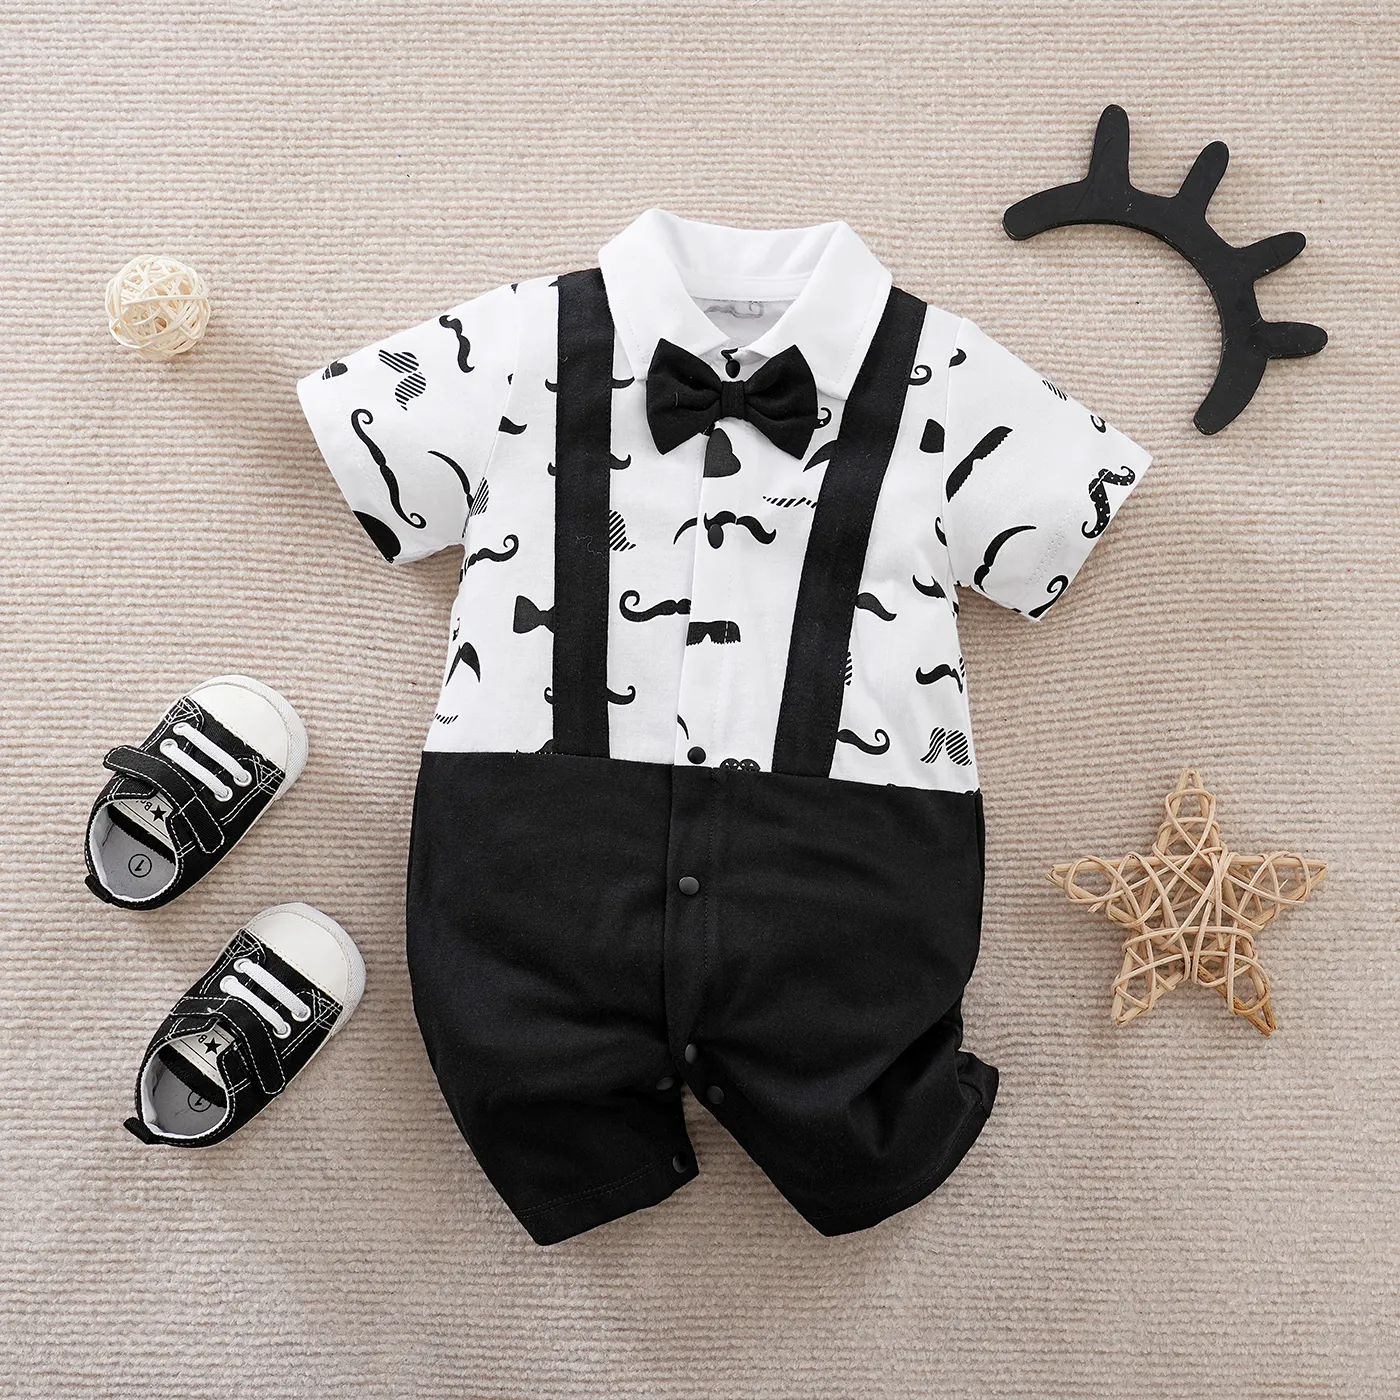 Baby Boy Casual Cotton Stitched Fabric Short Sleeve Jumpsuit